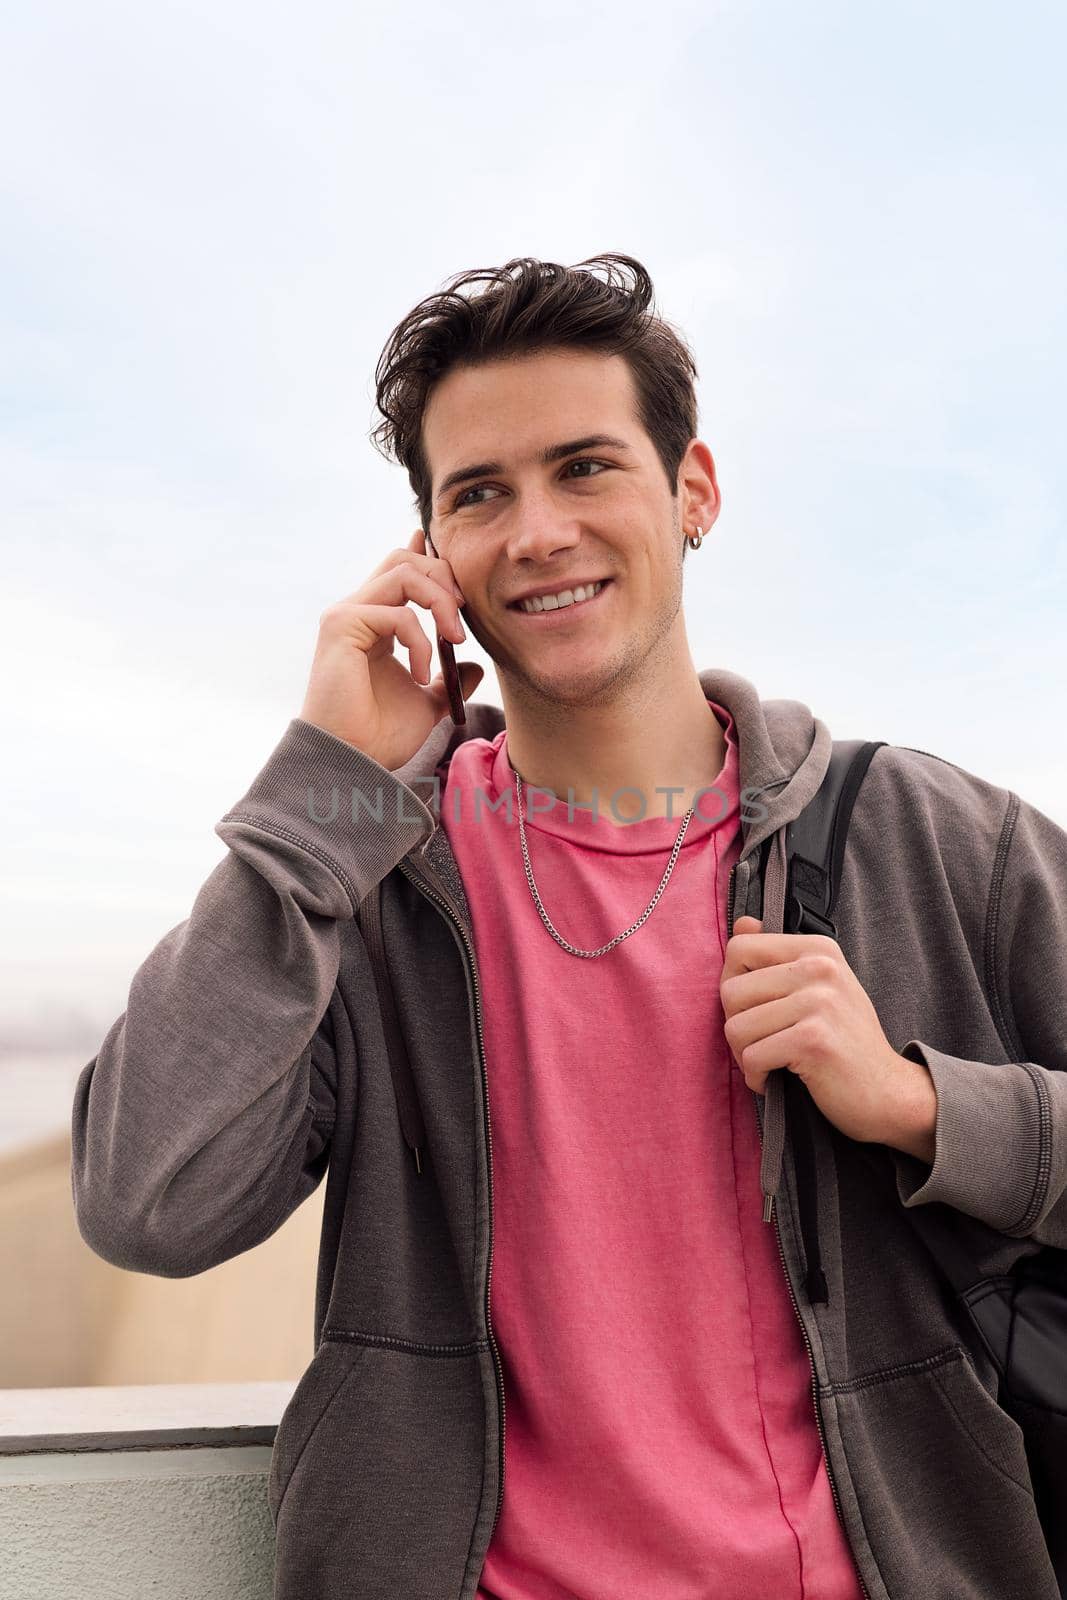 smiling happy young man talking on mobile phone by raulmelldo